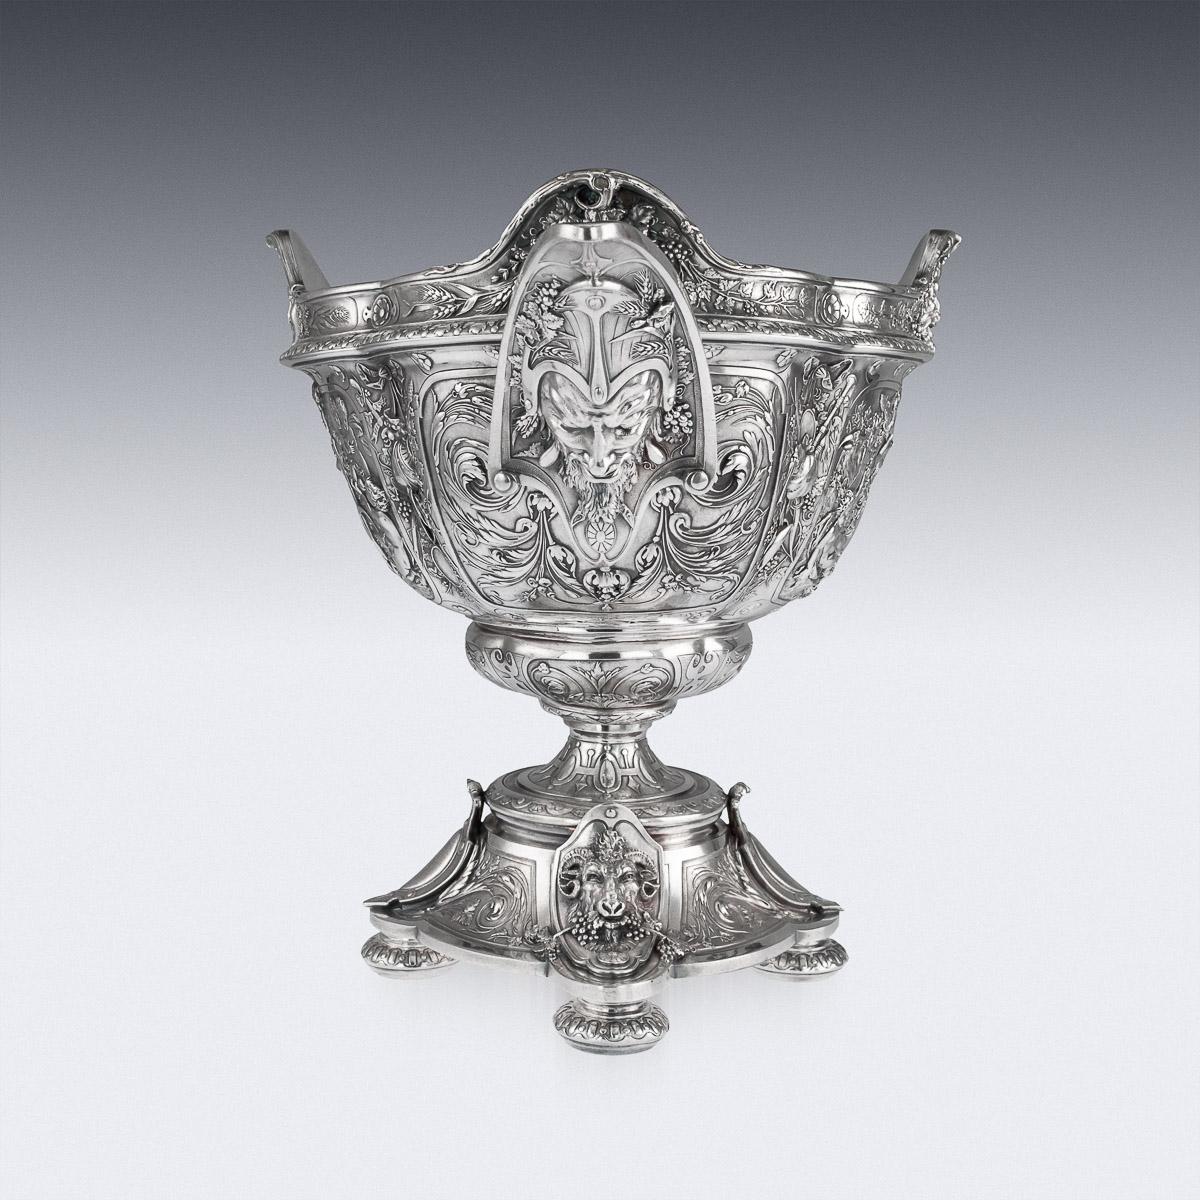 Antique late 19th century exceptional Victorian silver plated centerpiece bowl, of oval form on a lobed oval base on four circular feet, applied with satyr masks and shields, the body with panels of classical goddesses reclining amid grapes and